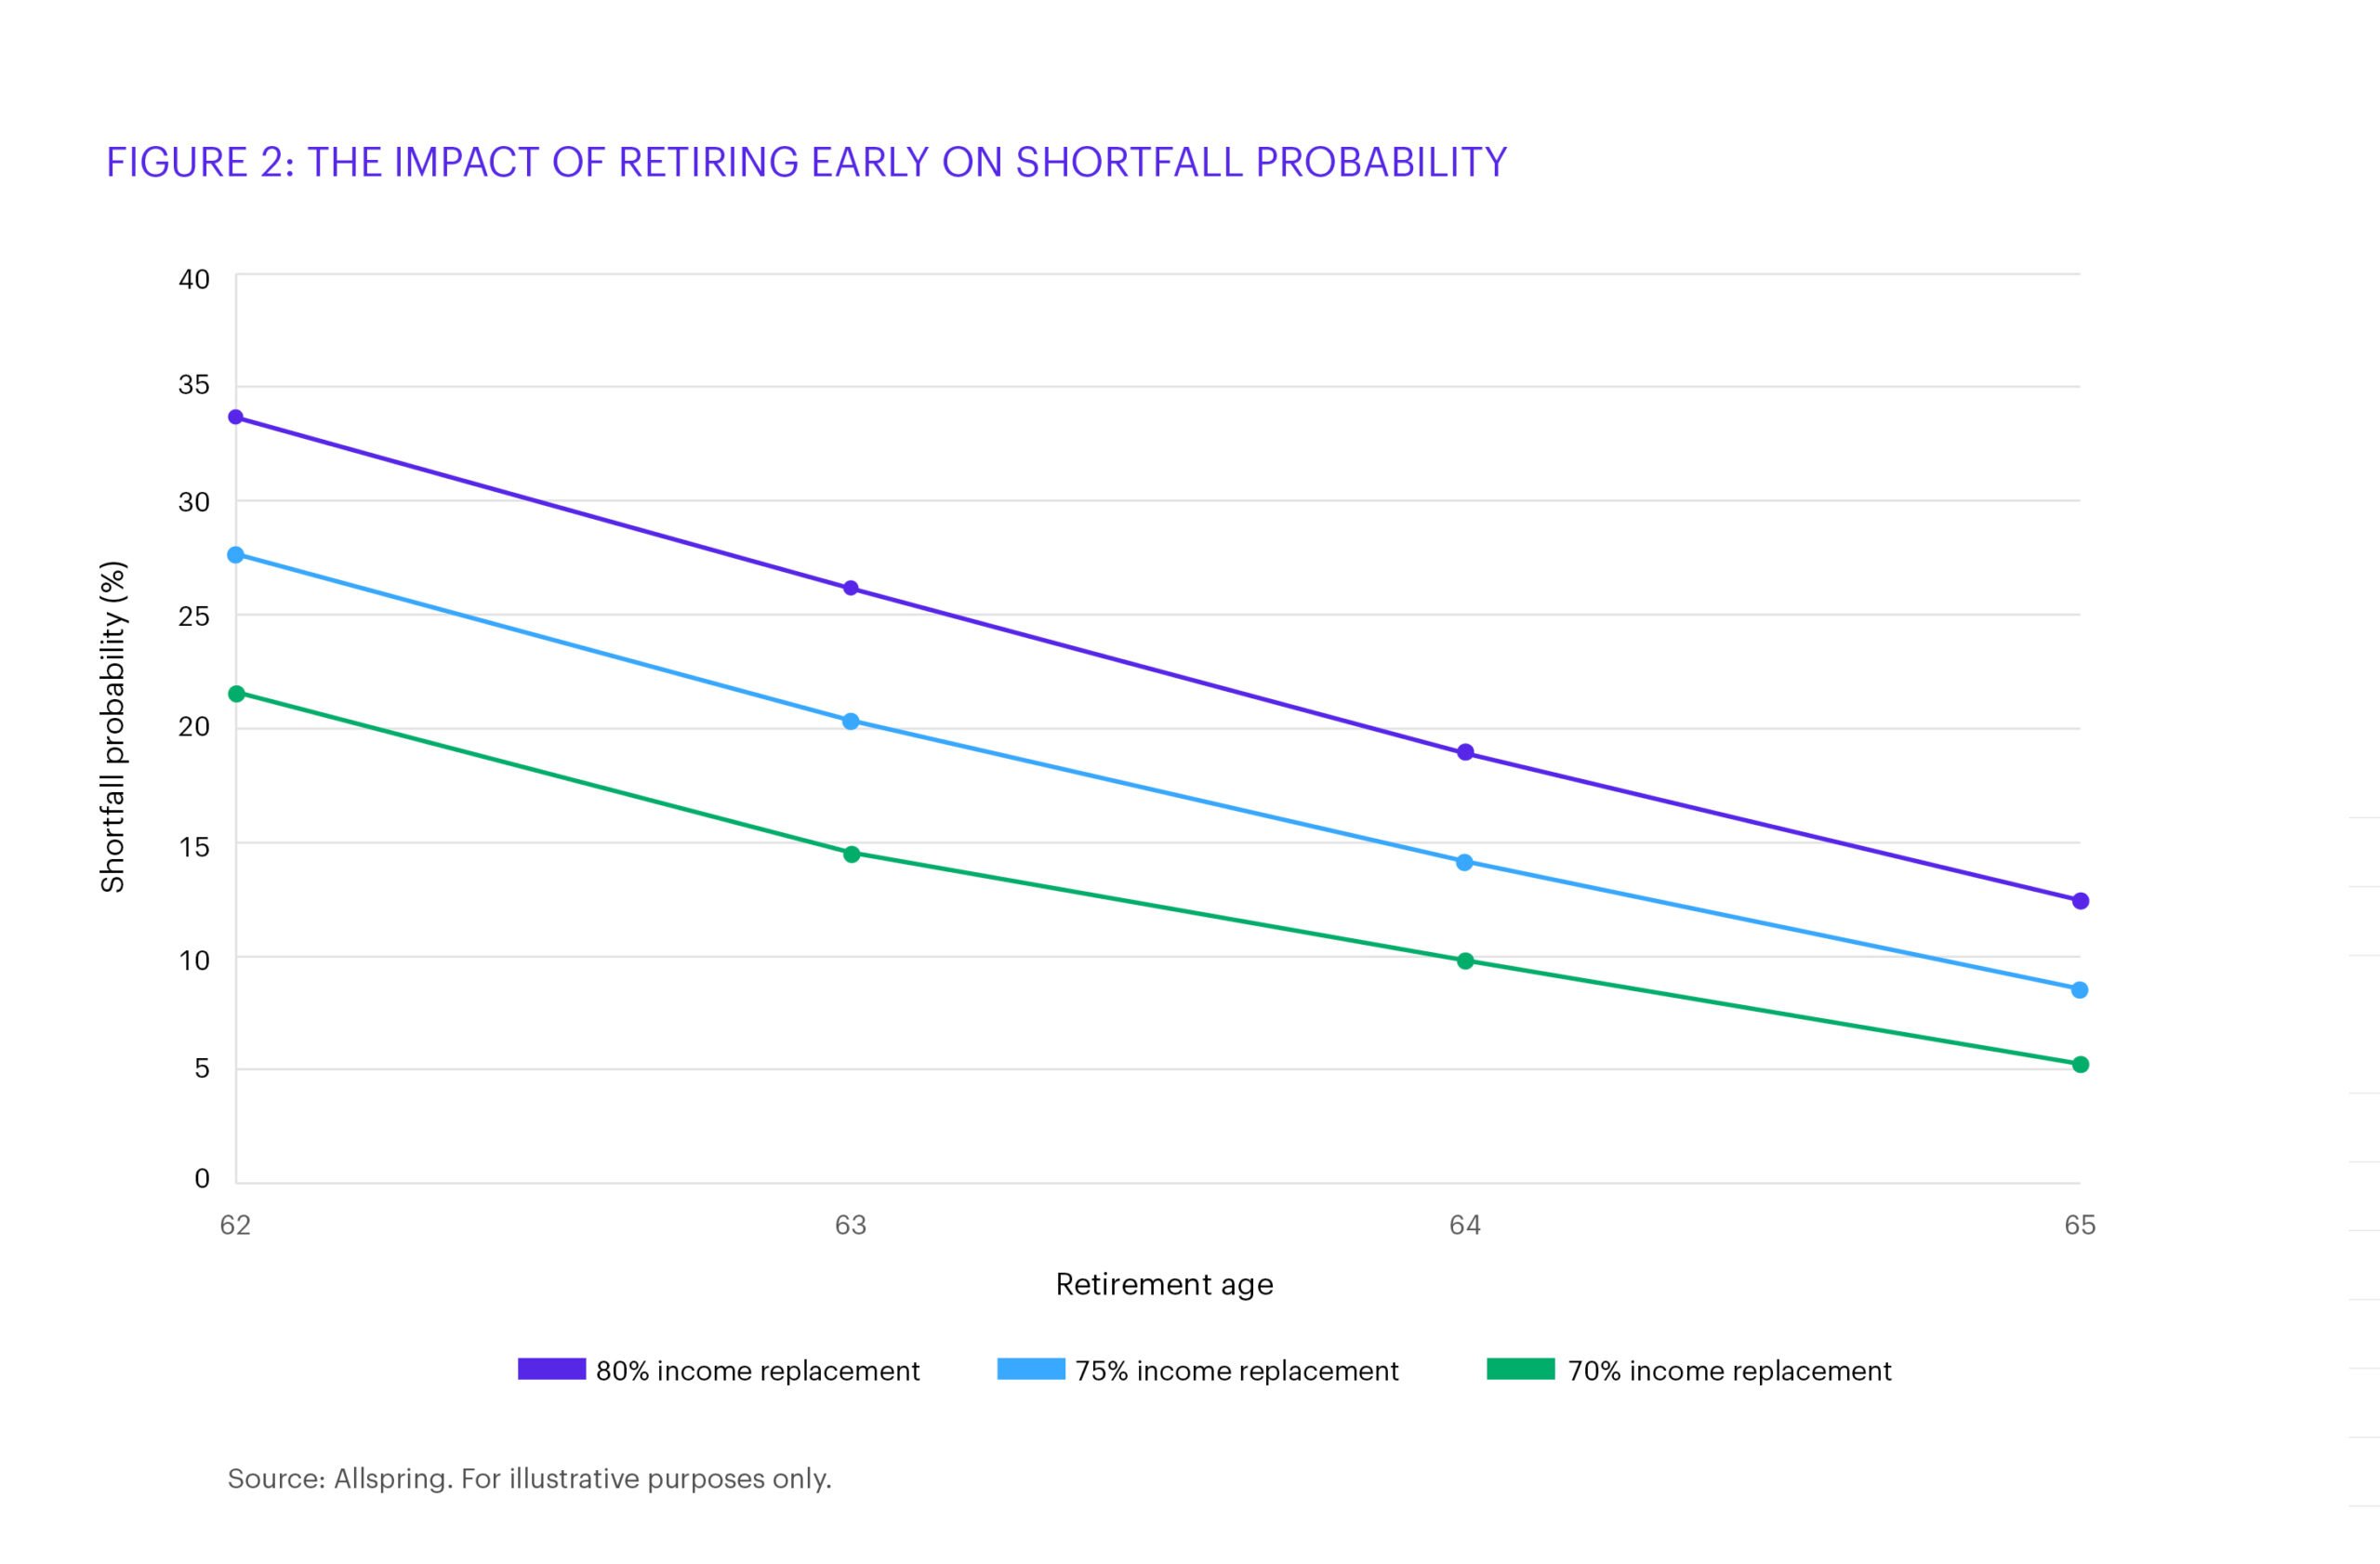 A chart showing the impact of retiring early, and the probability of a shortfall based on 70%, 75%, and 80% income replacement.